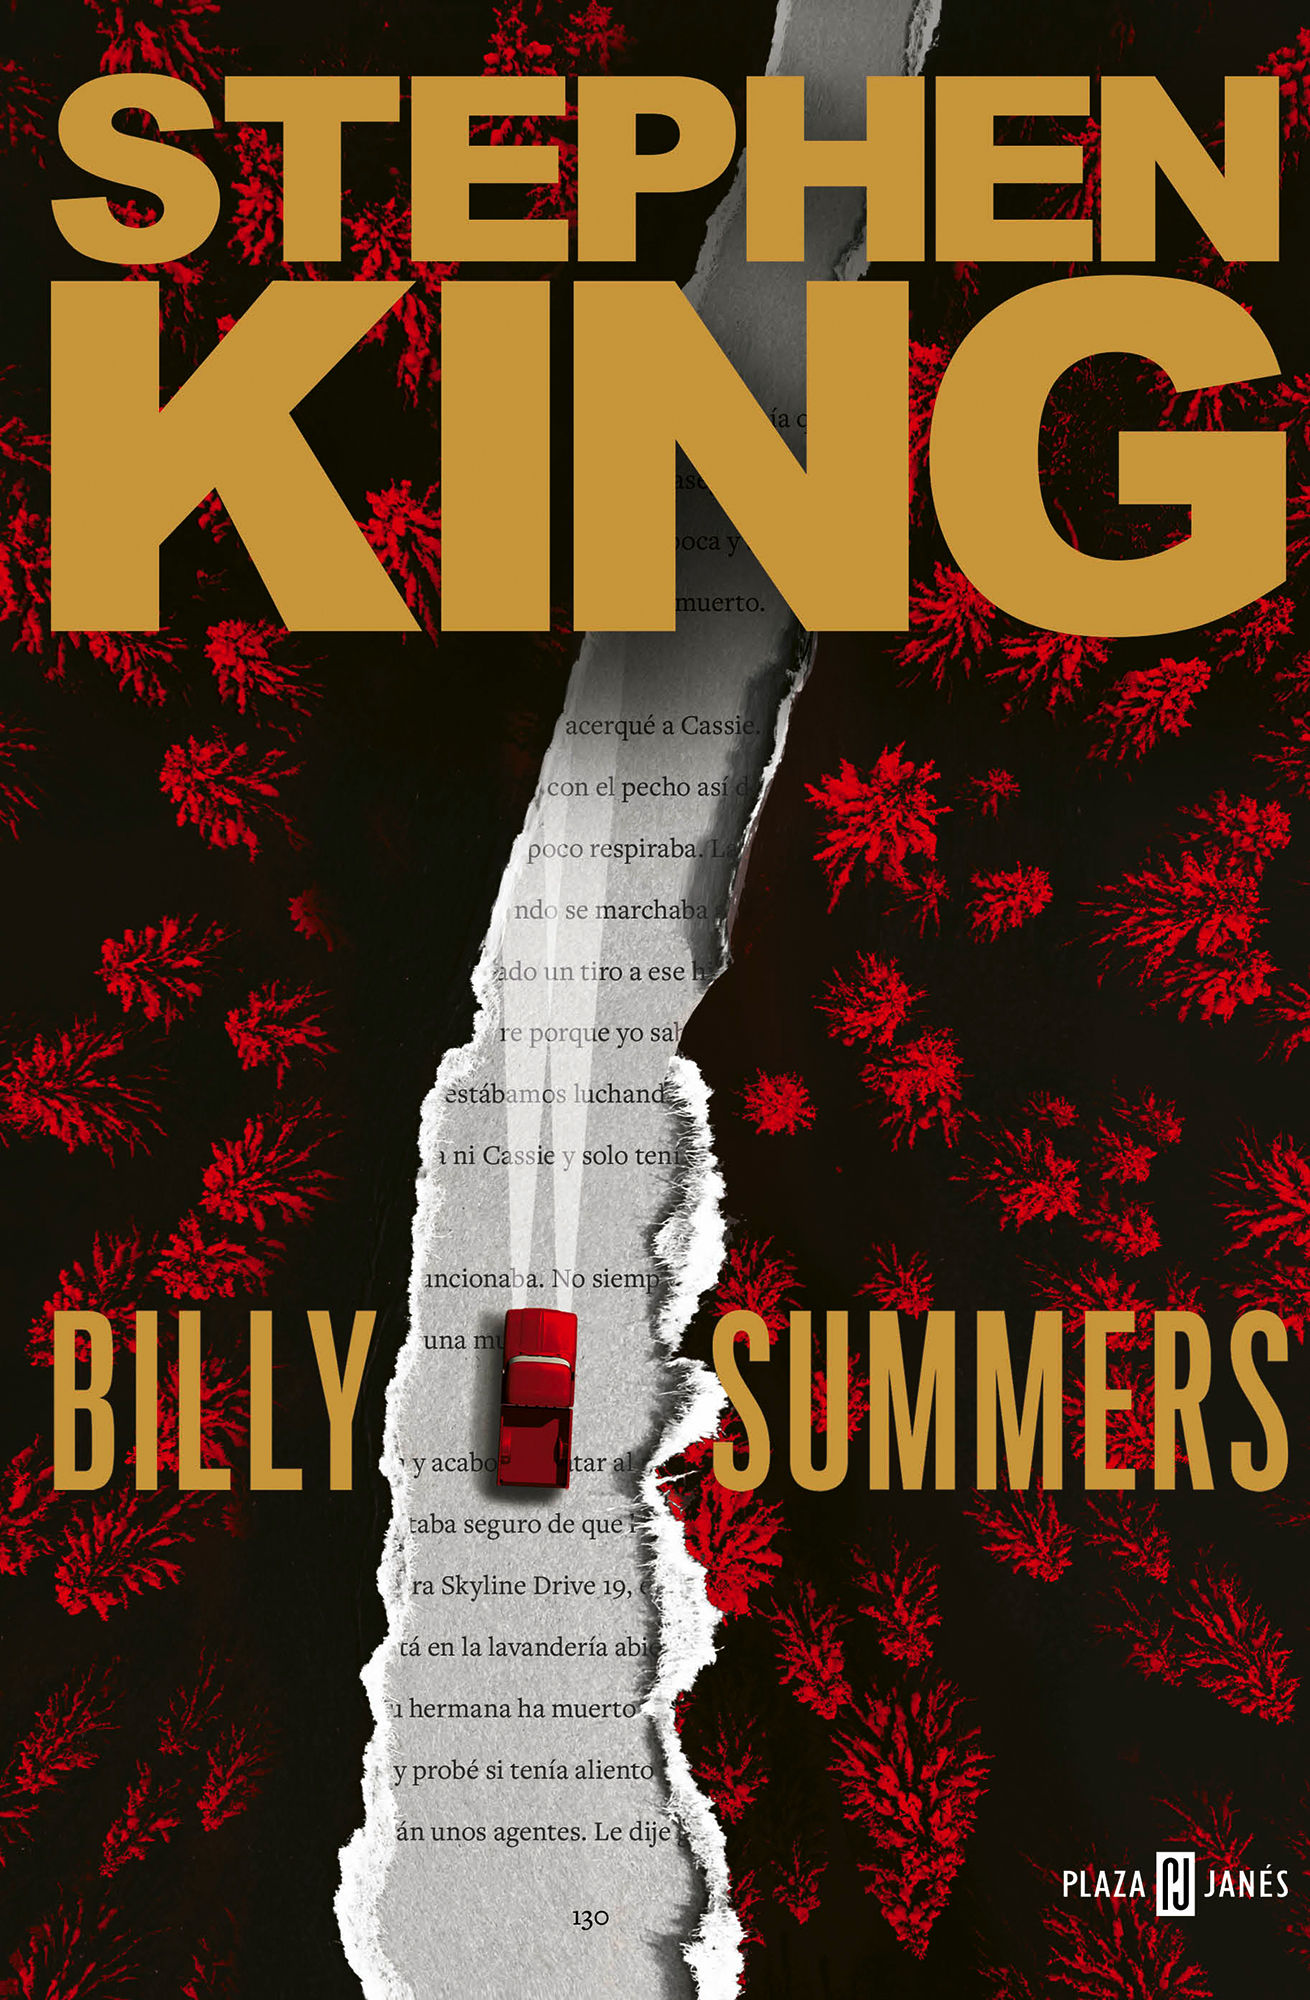 BILLY SUMMERS. 